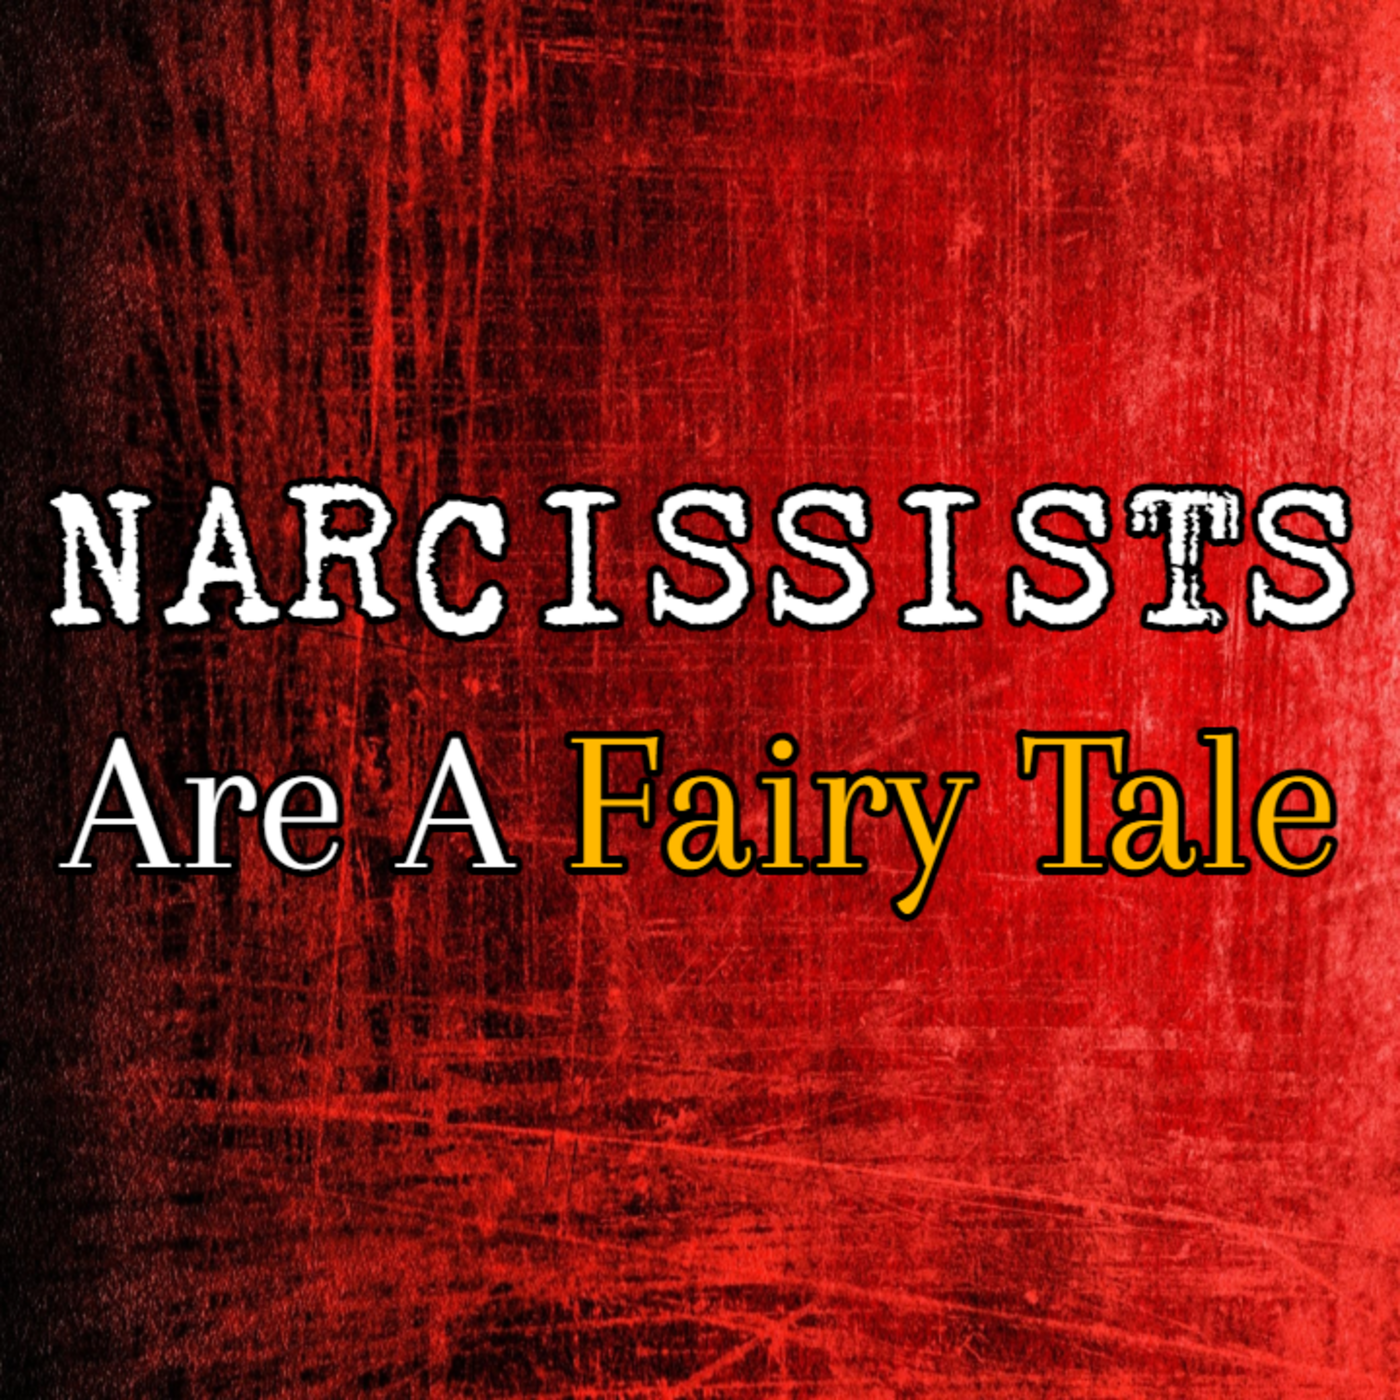 Episode 224: Narcissists Are A Fairy Tale